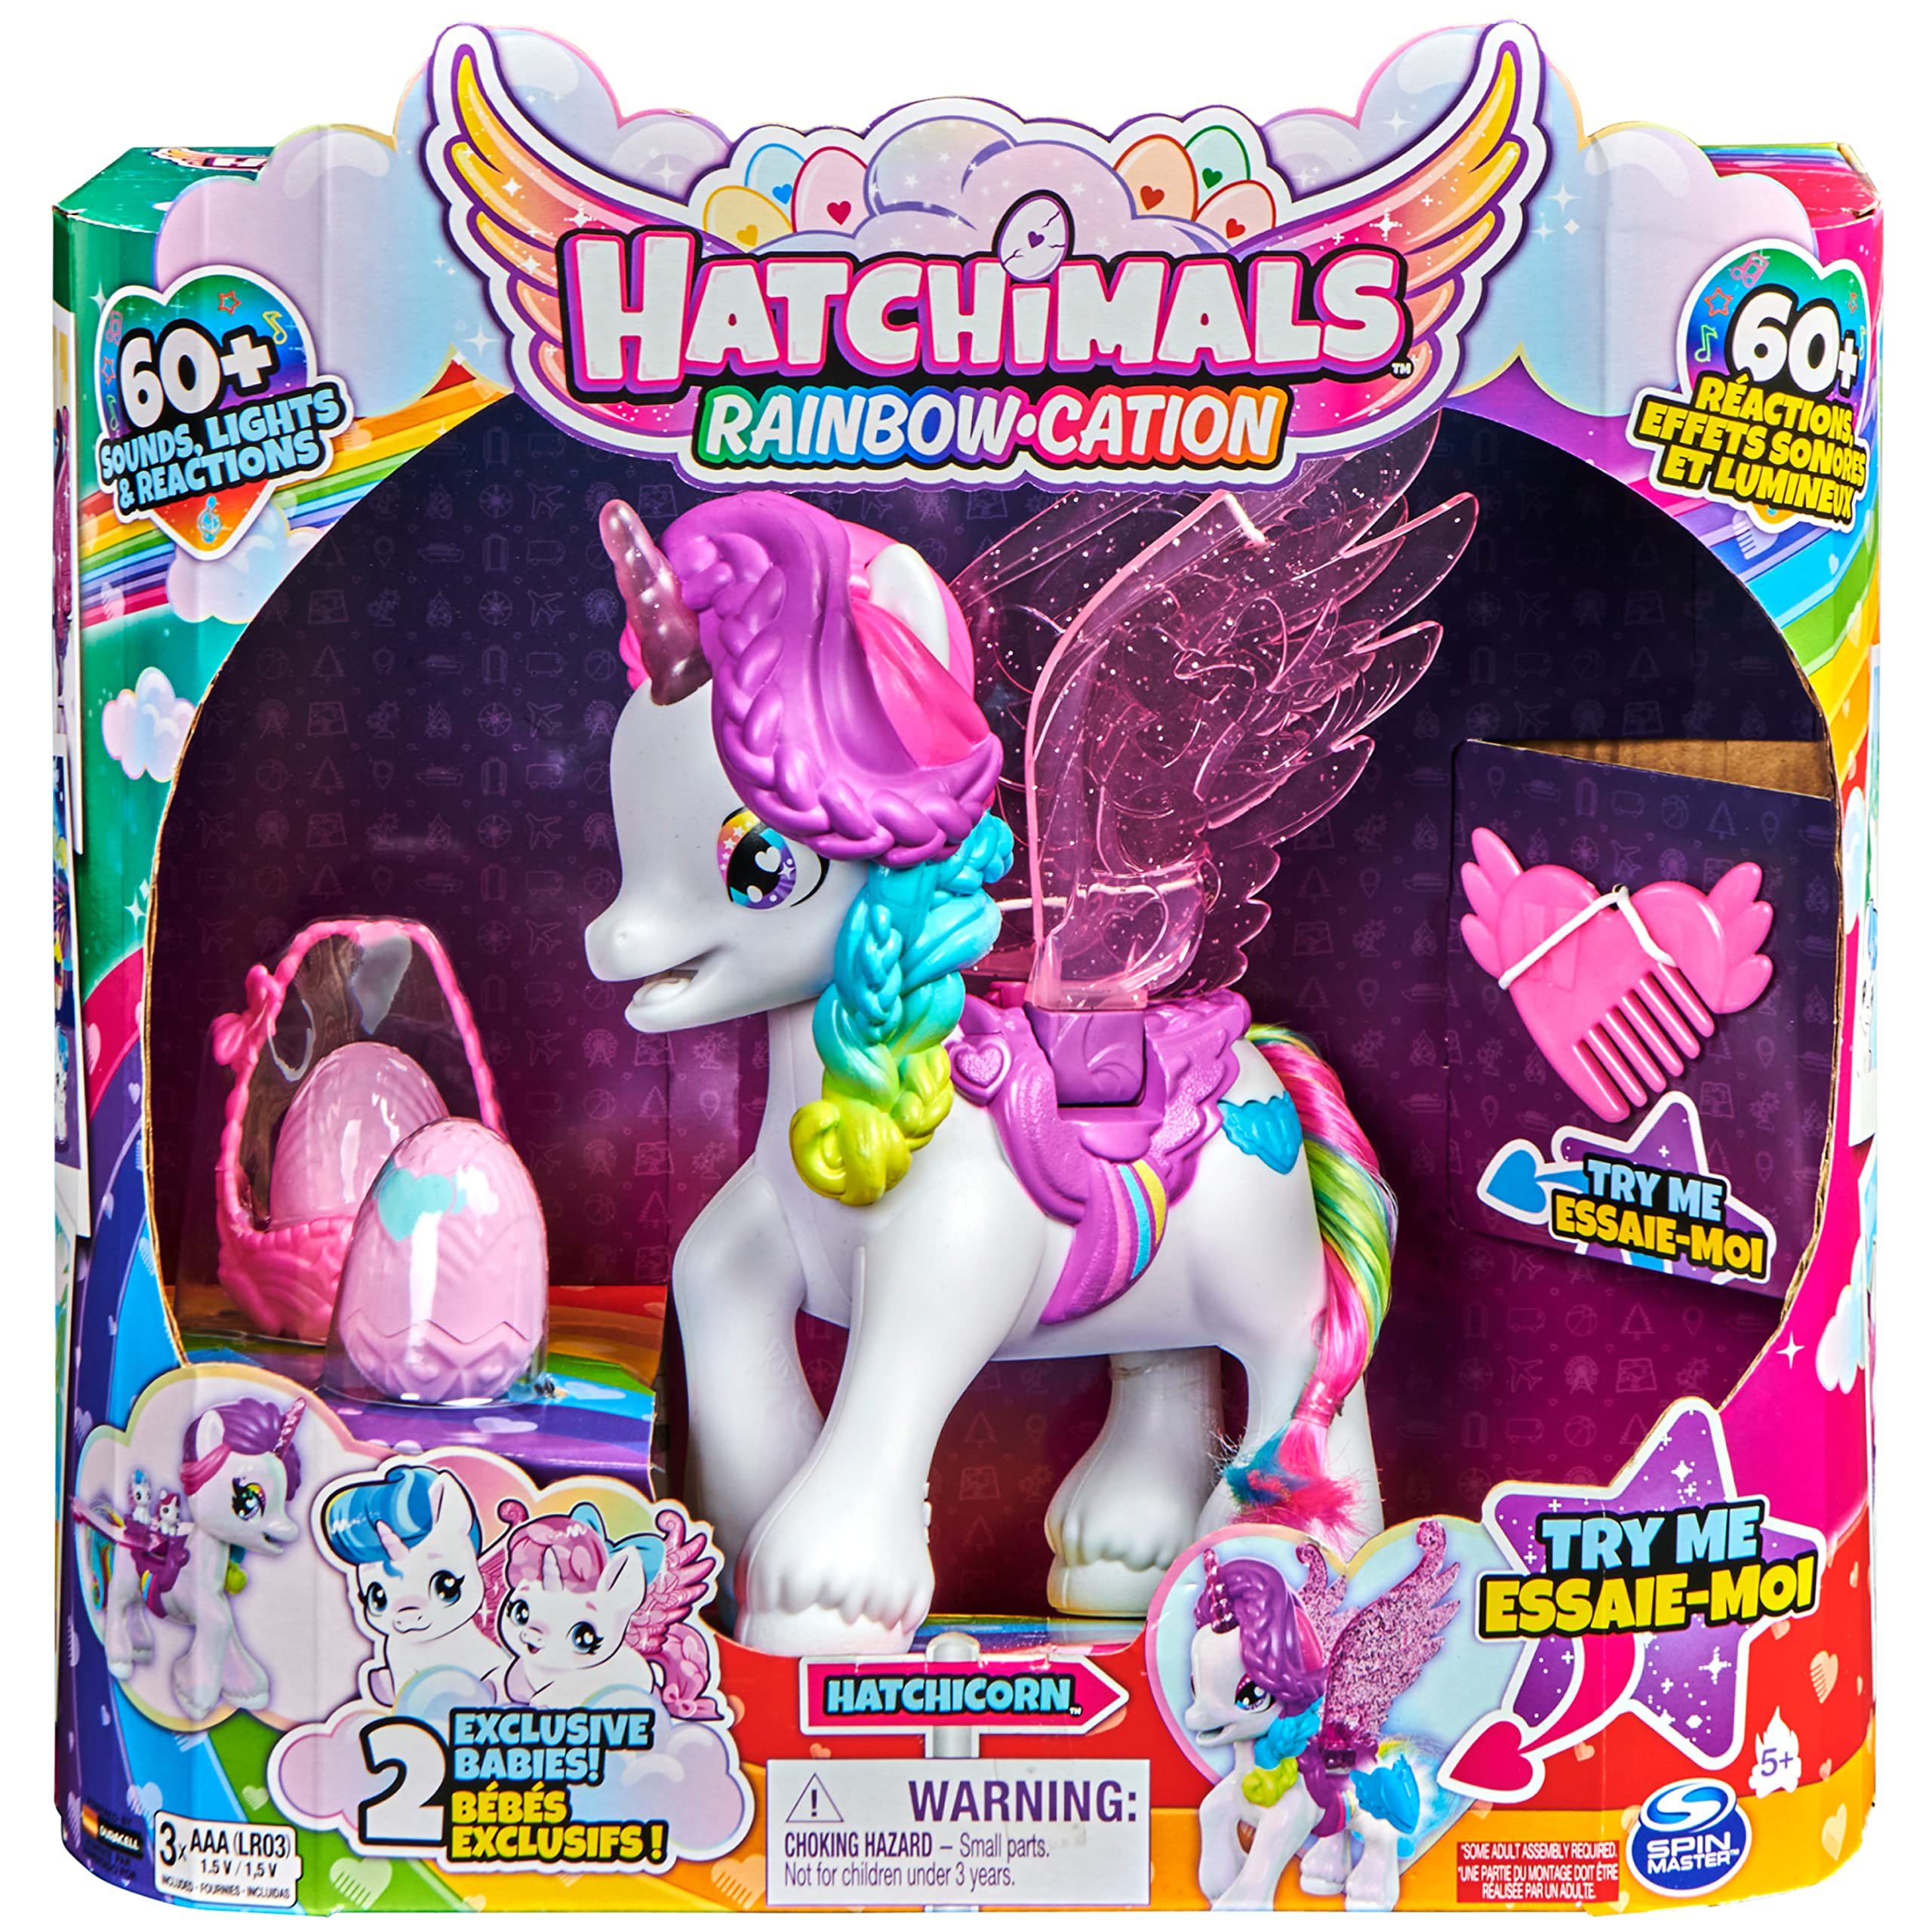 Hatchimals CollEGGtibles, Hatchicorn Unicorn Toy with Flapping Wings, Over 60 Lights & Sounds, 2 Exclusive Babies, Kids Toys for Girls Ages 5 and up